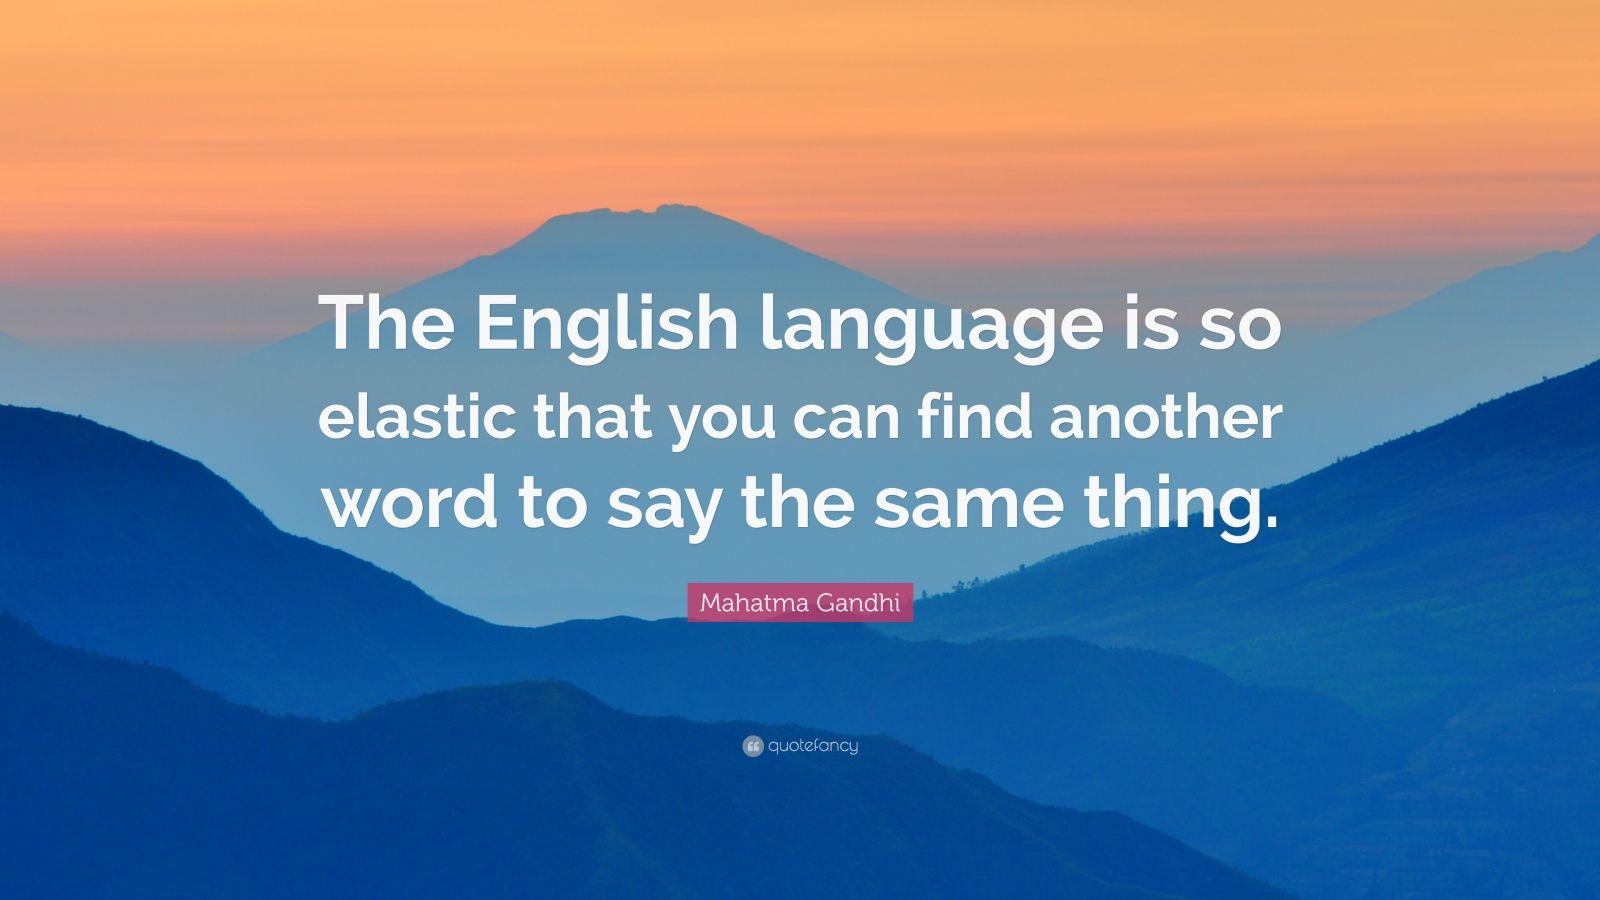 Mahatma Gandhi Quote: “The English language is so elastic that you can